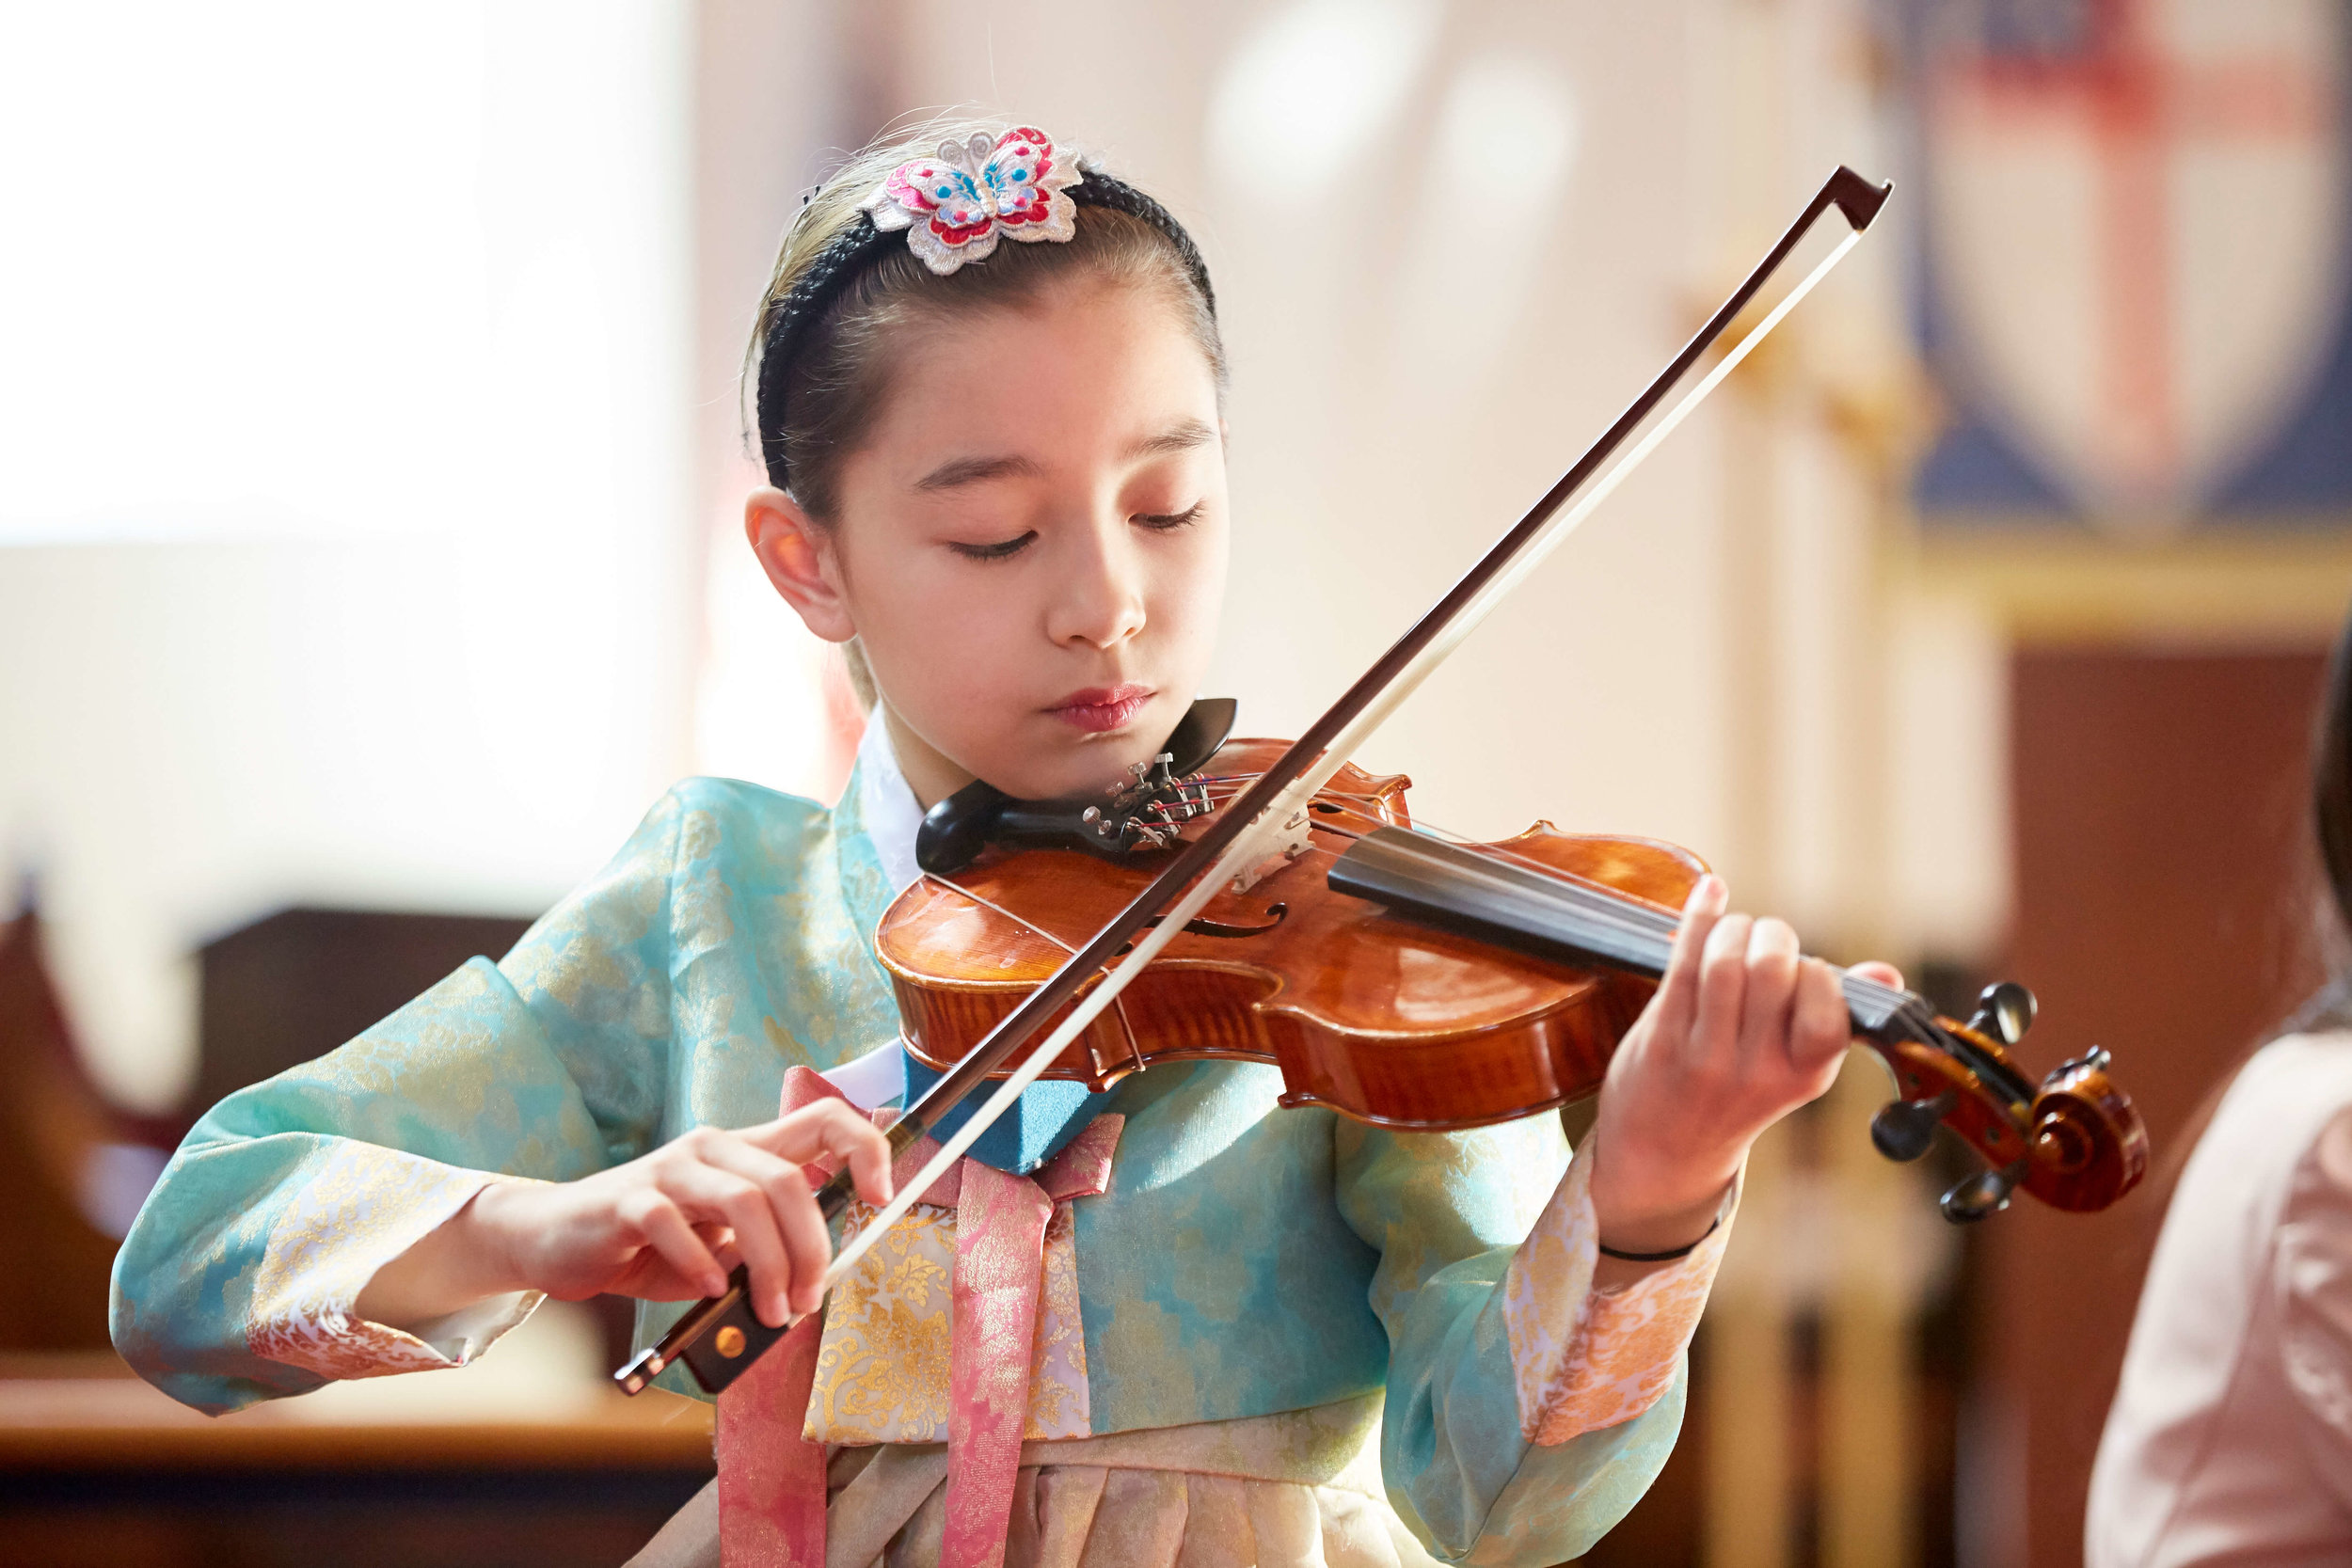   VIOLIN/CELLO LESSONS IN CINCINNATI, ANDERSON &amp; MASON   for beginner, intermediate, and advanced students of all ages  CALL  513-560-9175  TODAY TO SCHEDULE YOUR FIRST LESSON   Request Info  